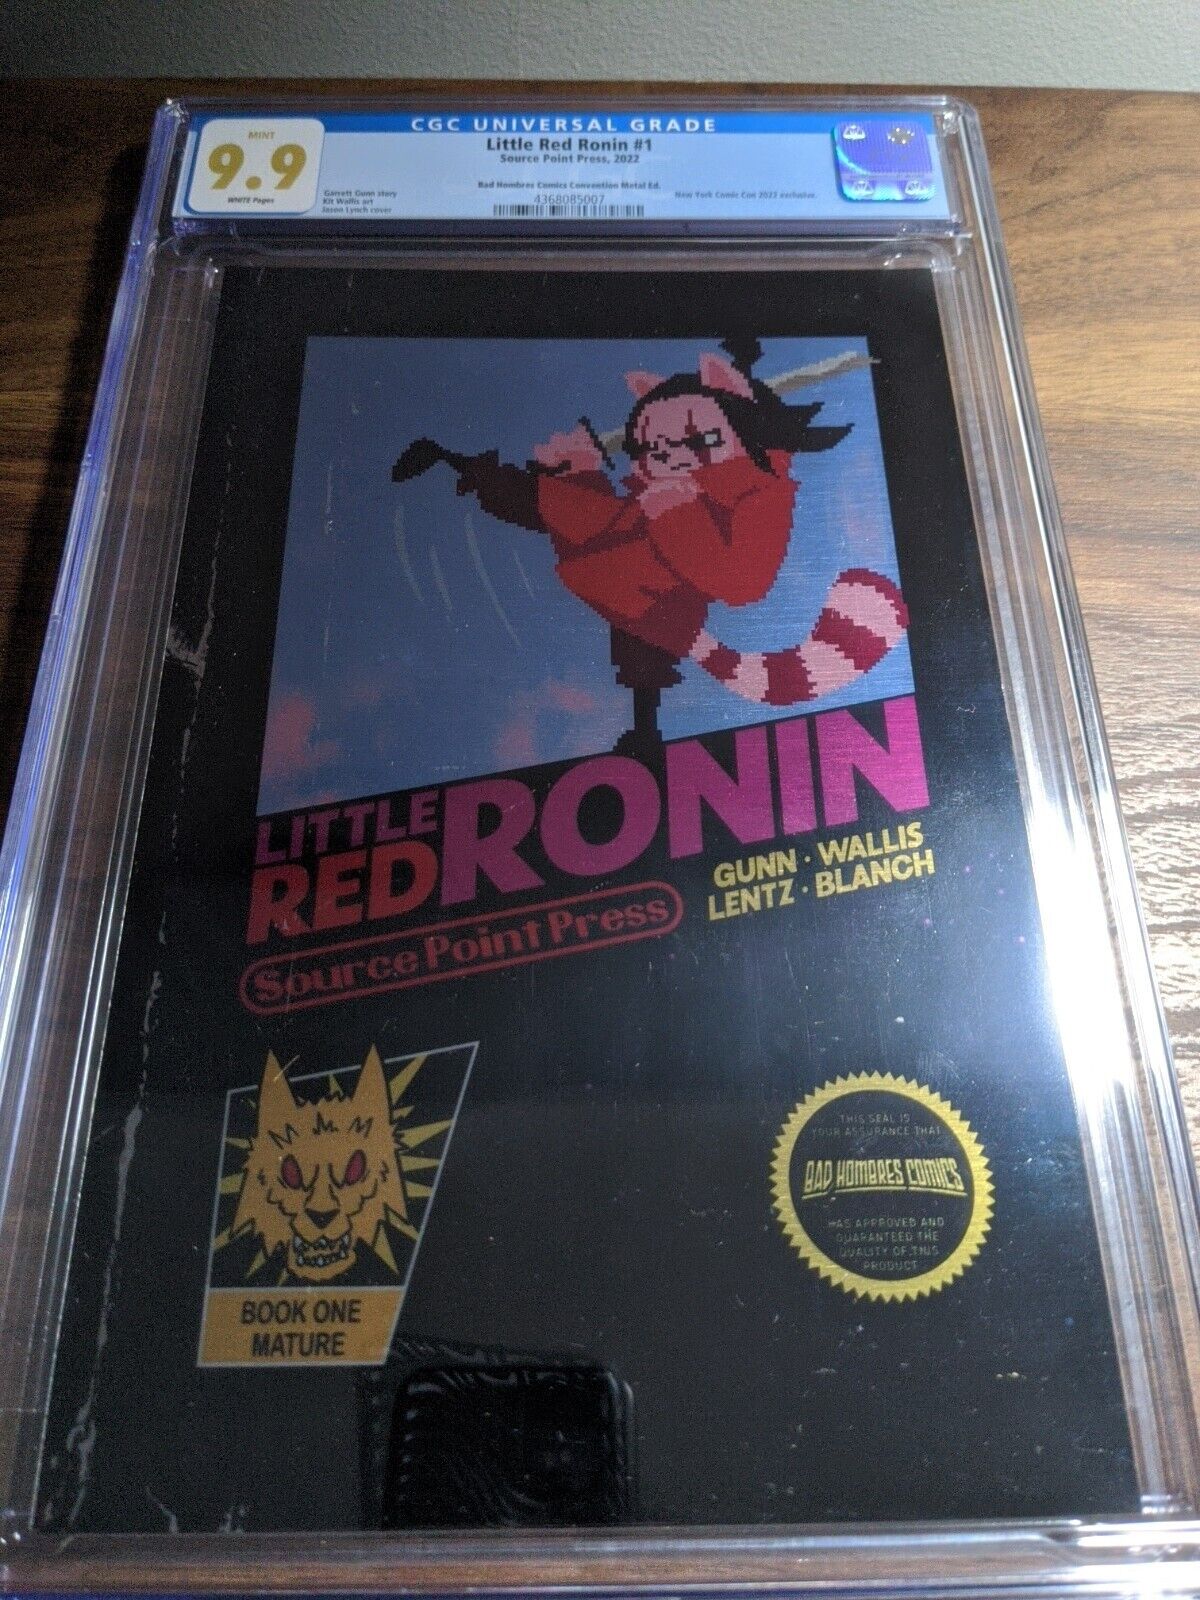 Little Red Ronin 1 metal Cgc 9.9 Not 9.8 Bad Hombres NYCC Exclusive 🔥